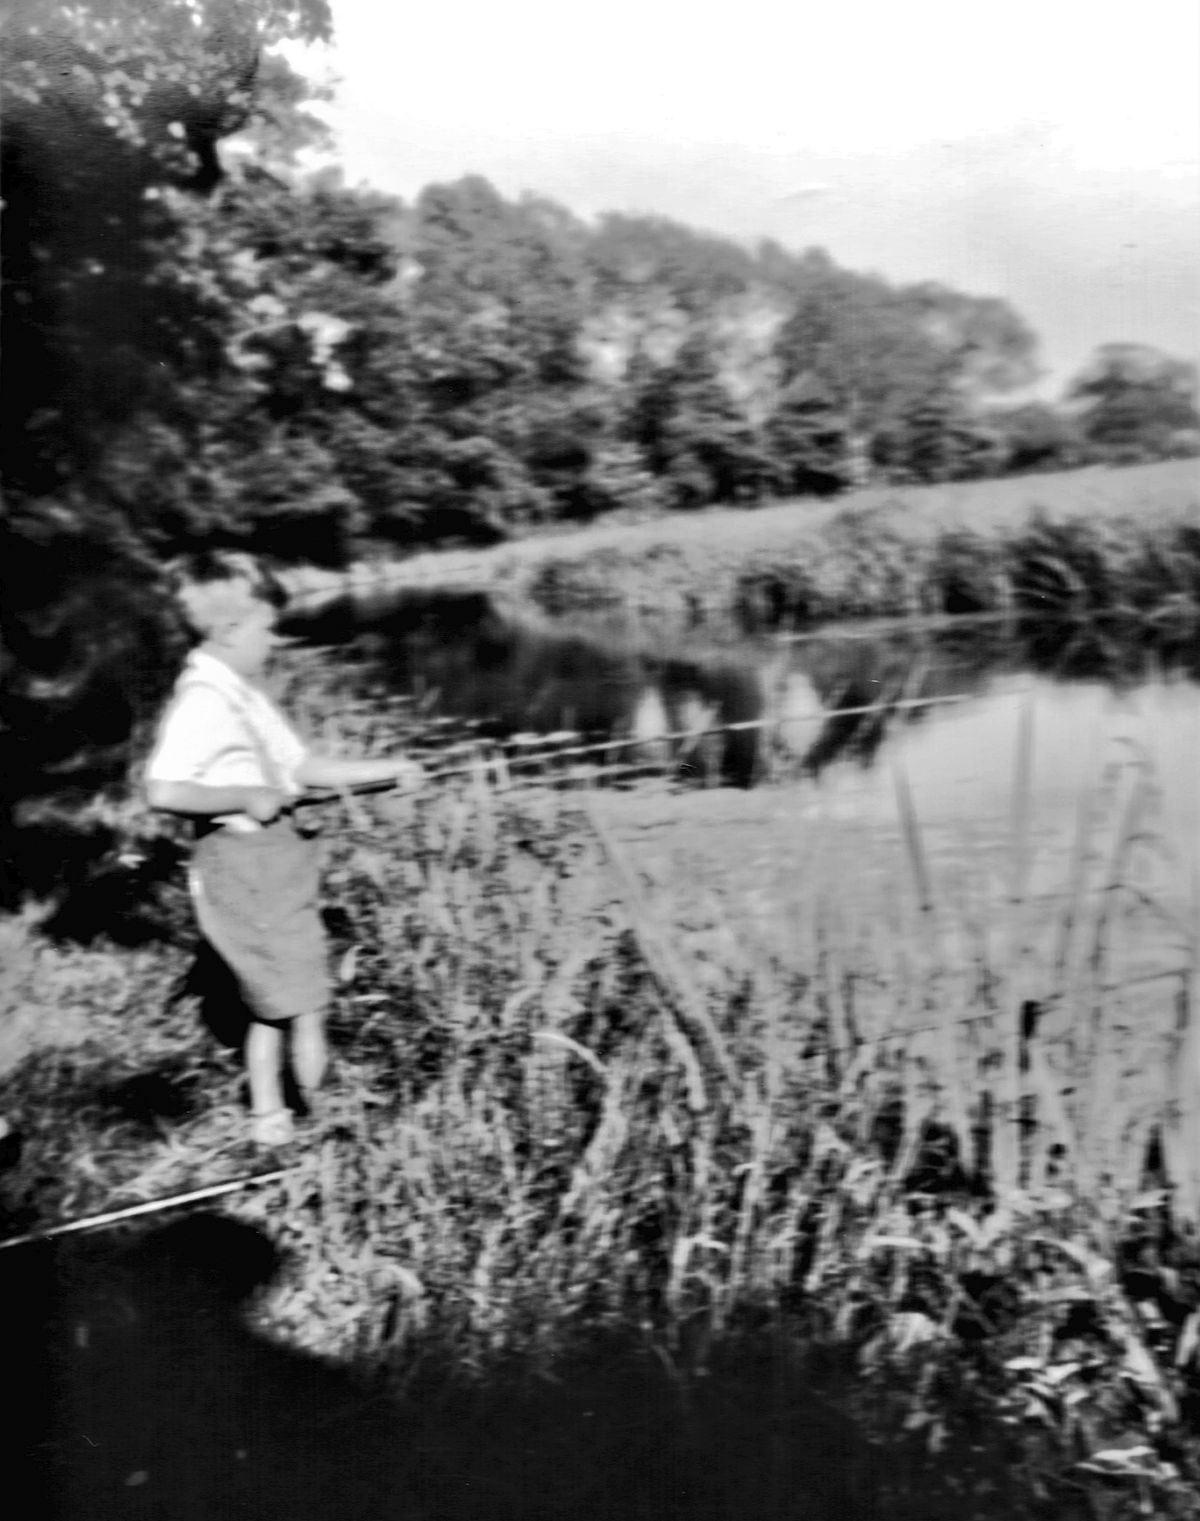 The beginning of it all for five-year-old Derek when he was fishing on the River Tern near Wellington in 1947.